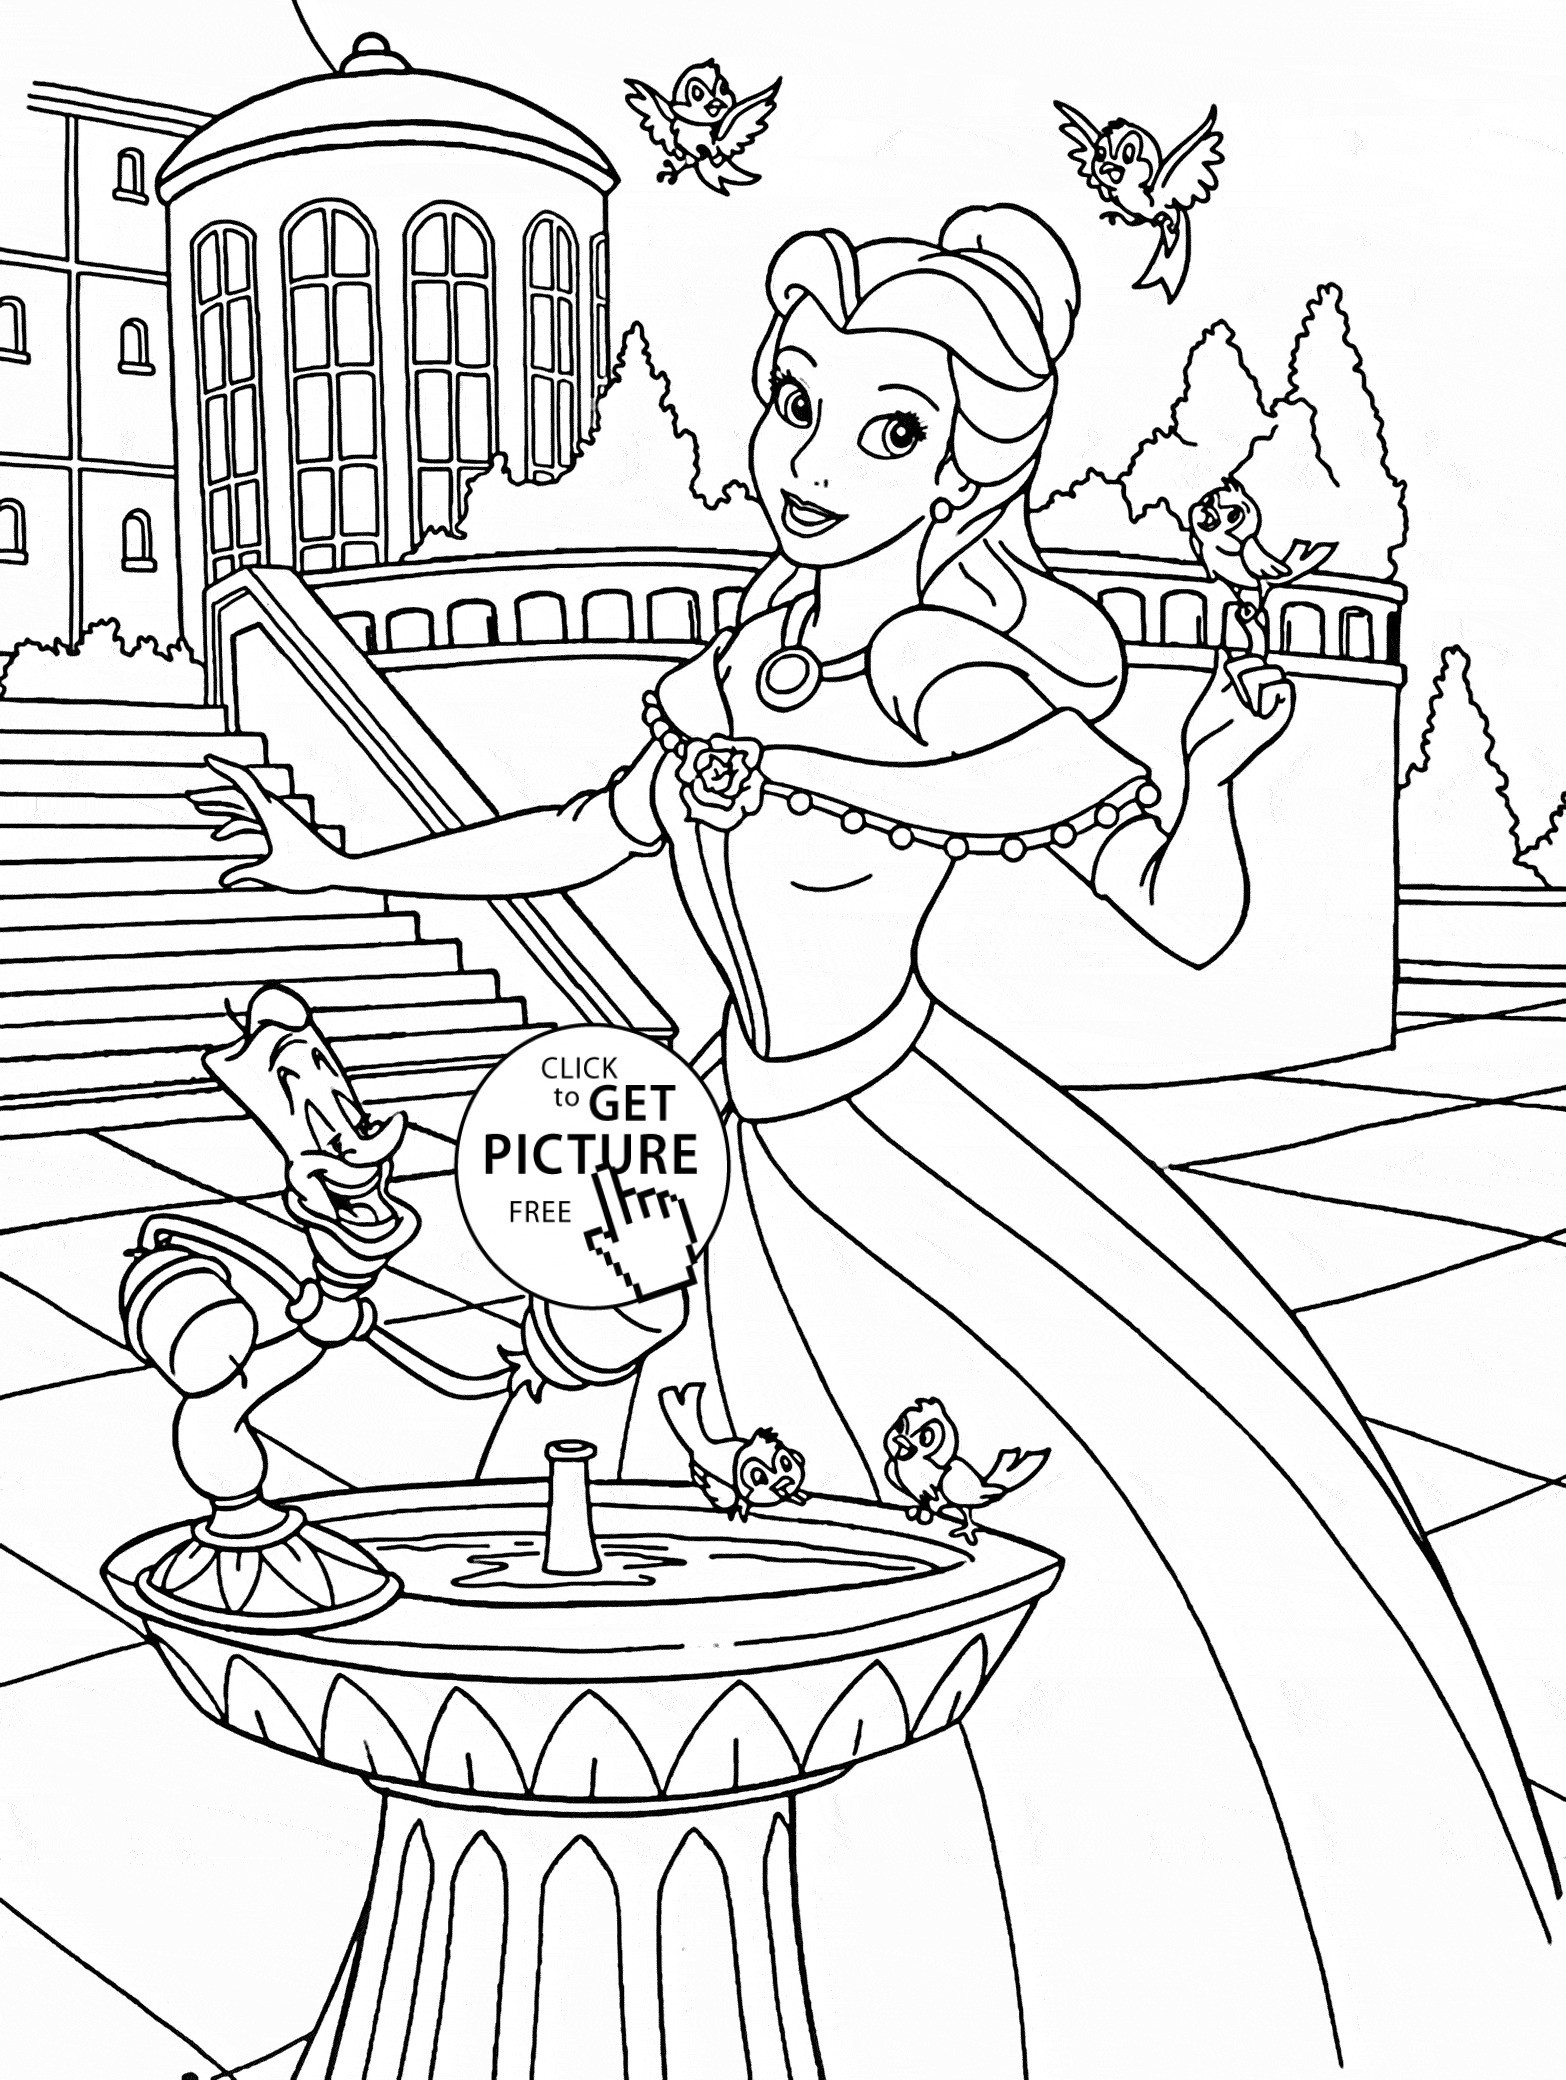 Printable Princess Coloring Page Lovely Marvelous Design Ideas Castle Coloring Pages Princess Bell In the